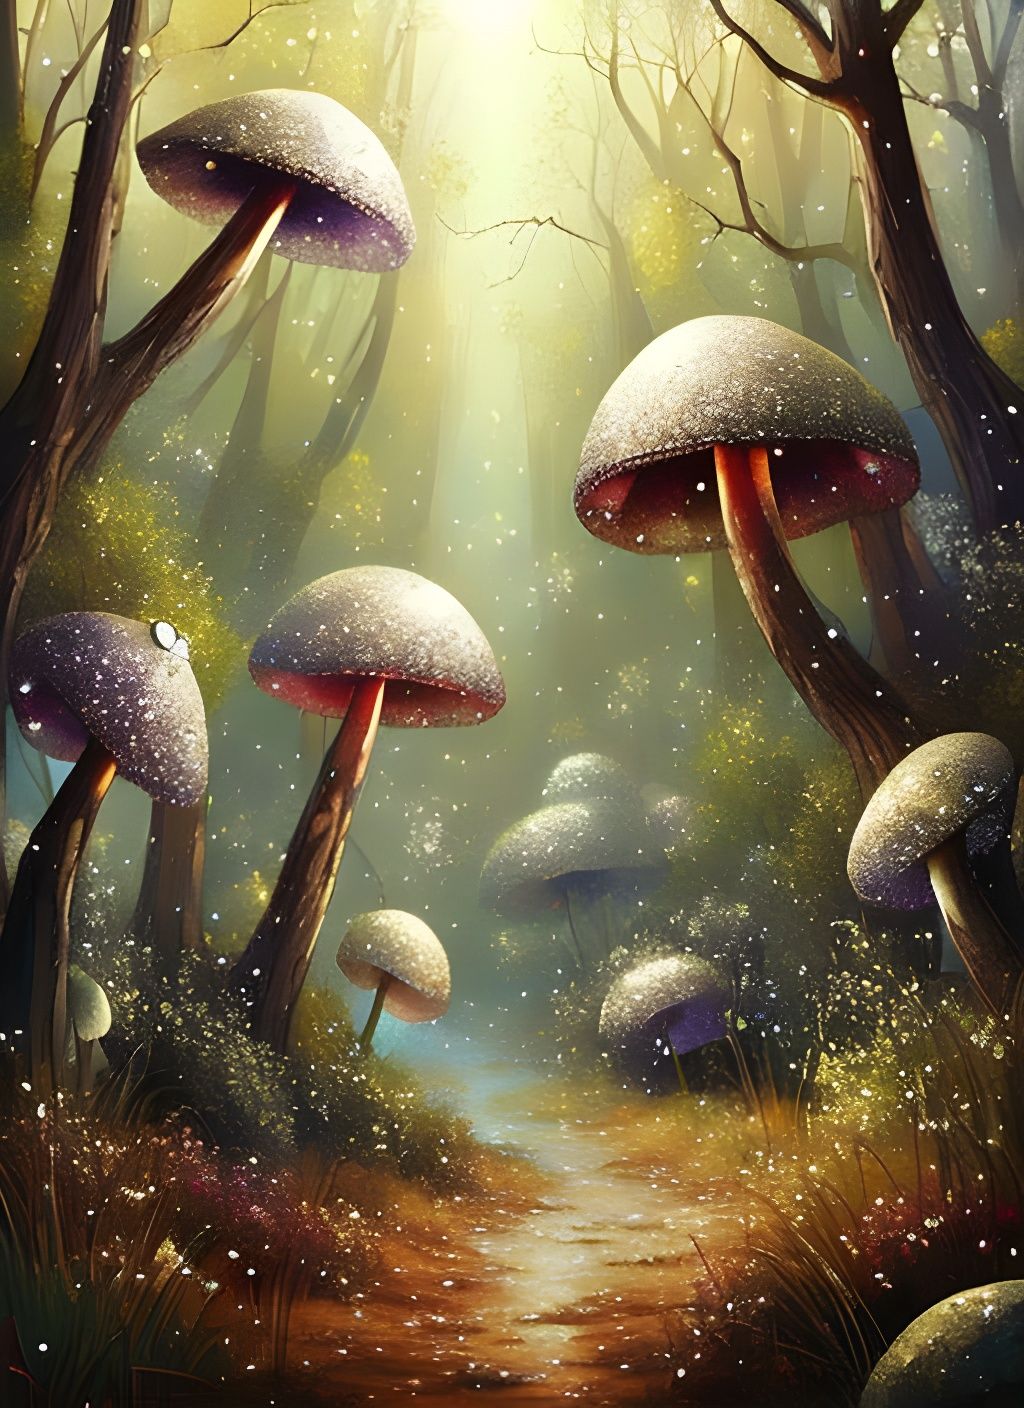 The forest of sparkling spores 